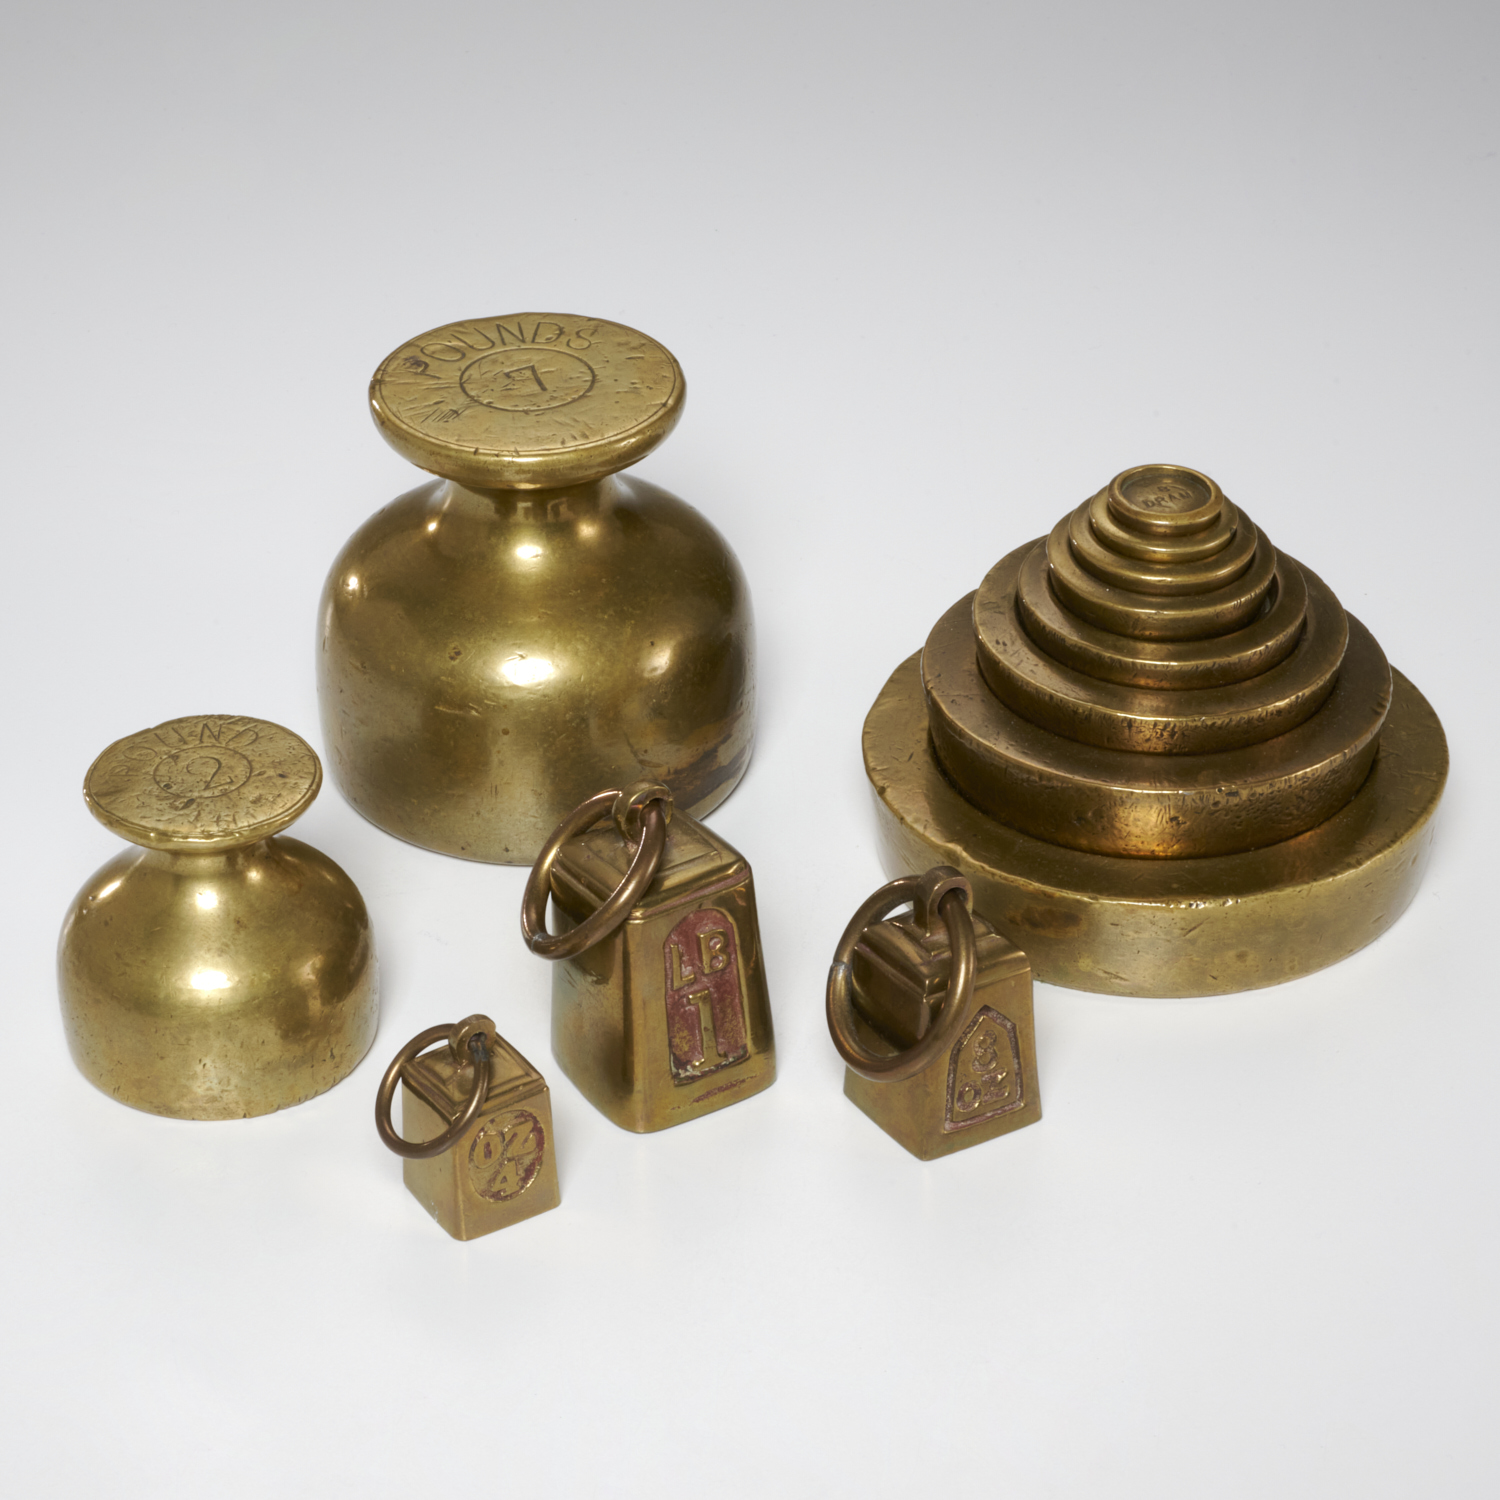 ANTIQUE ENGLISH BRASS WEIGHT COLLECTION 2fc337